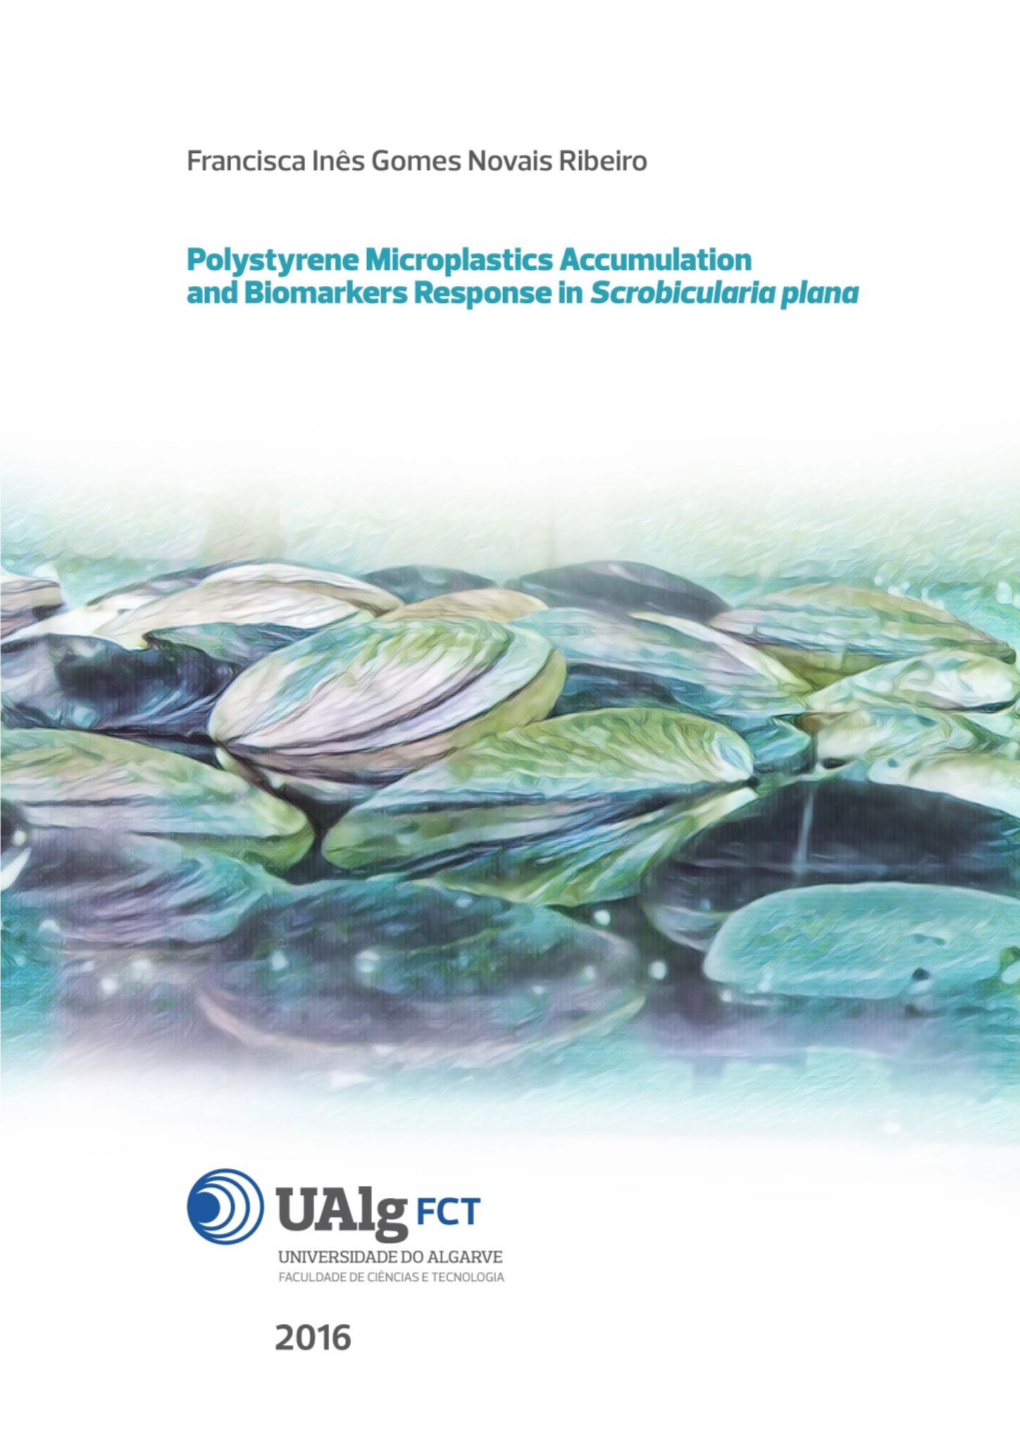 Polystyrene Microplastics Accumulation and Biomarkers Response in Scrobicularia Plana